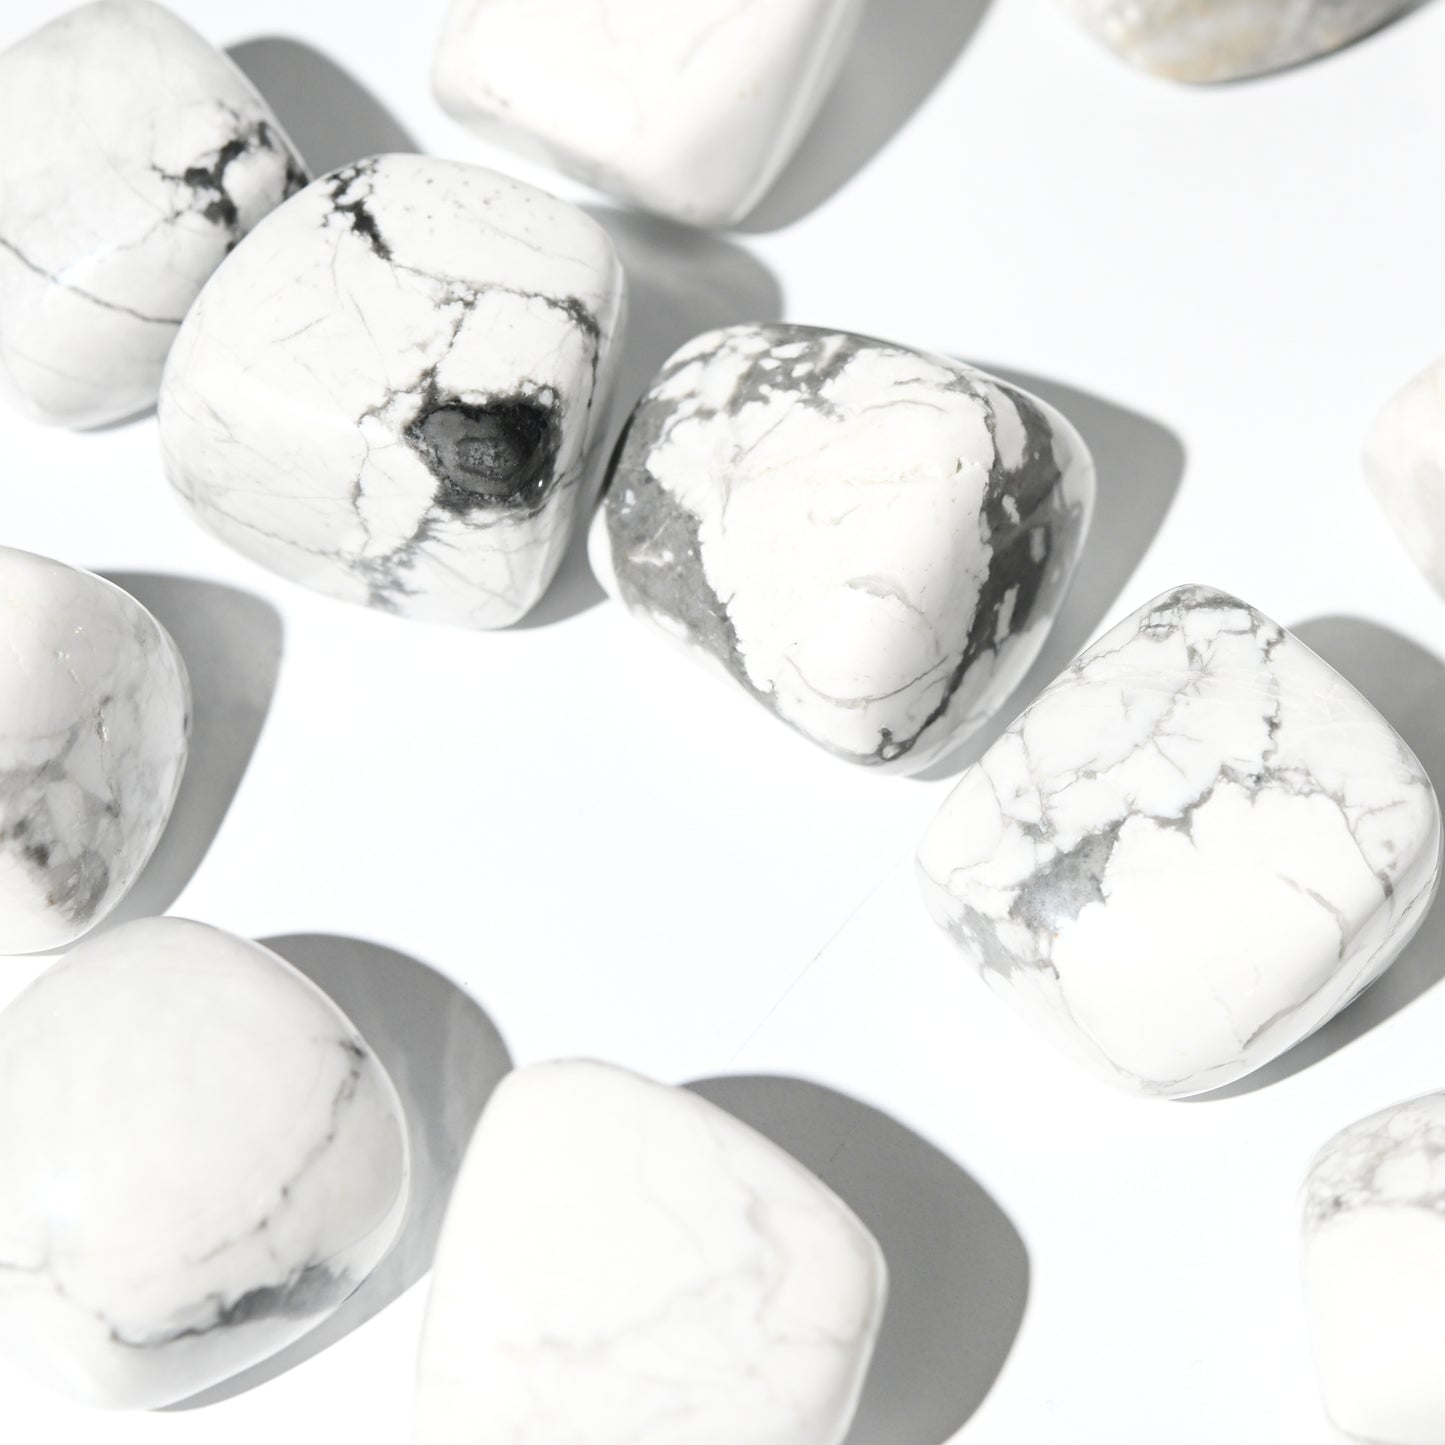 white howlite meaning